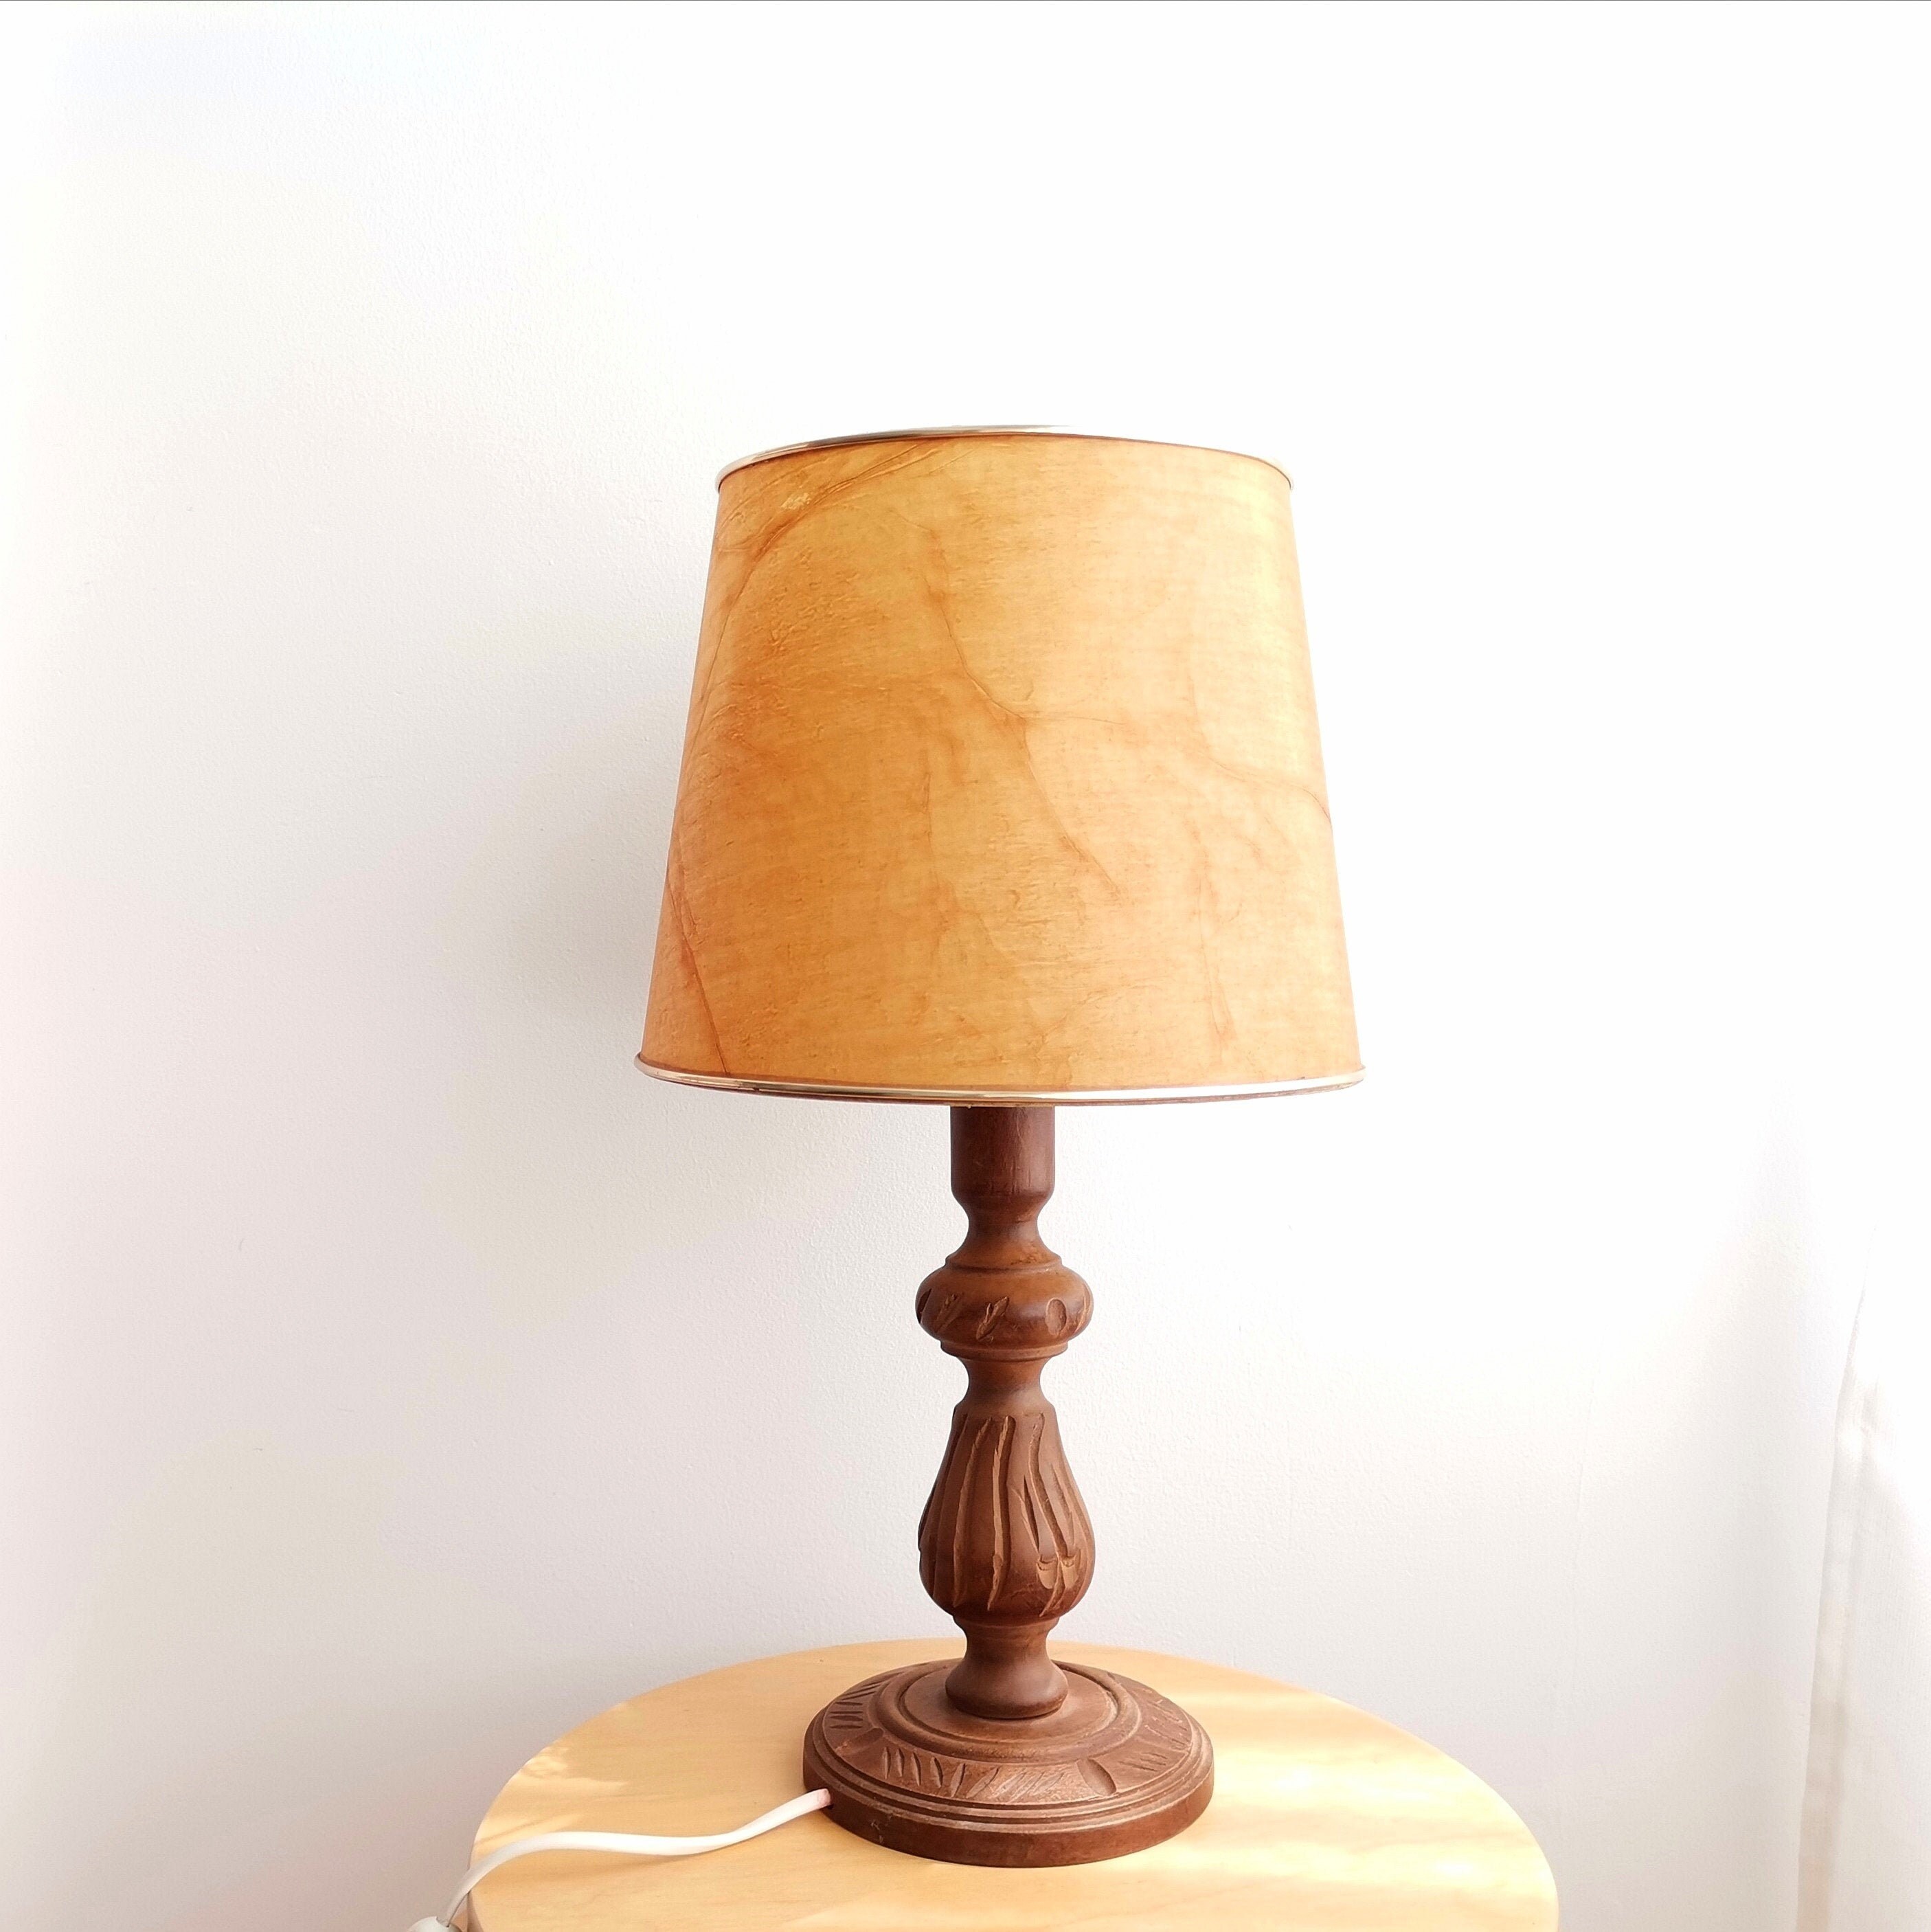 Carved wood Bedside lamp wooden mid century lamp unique | Etsy